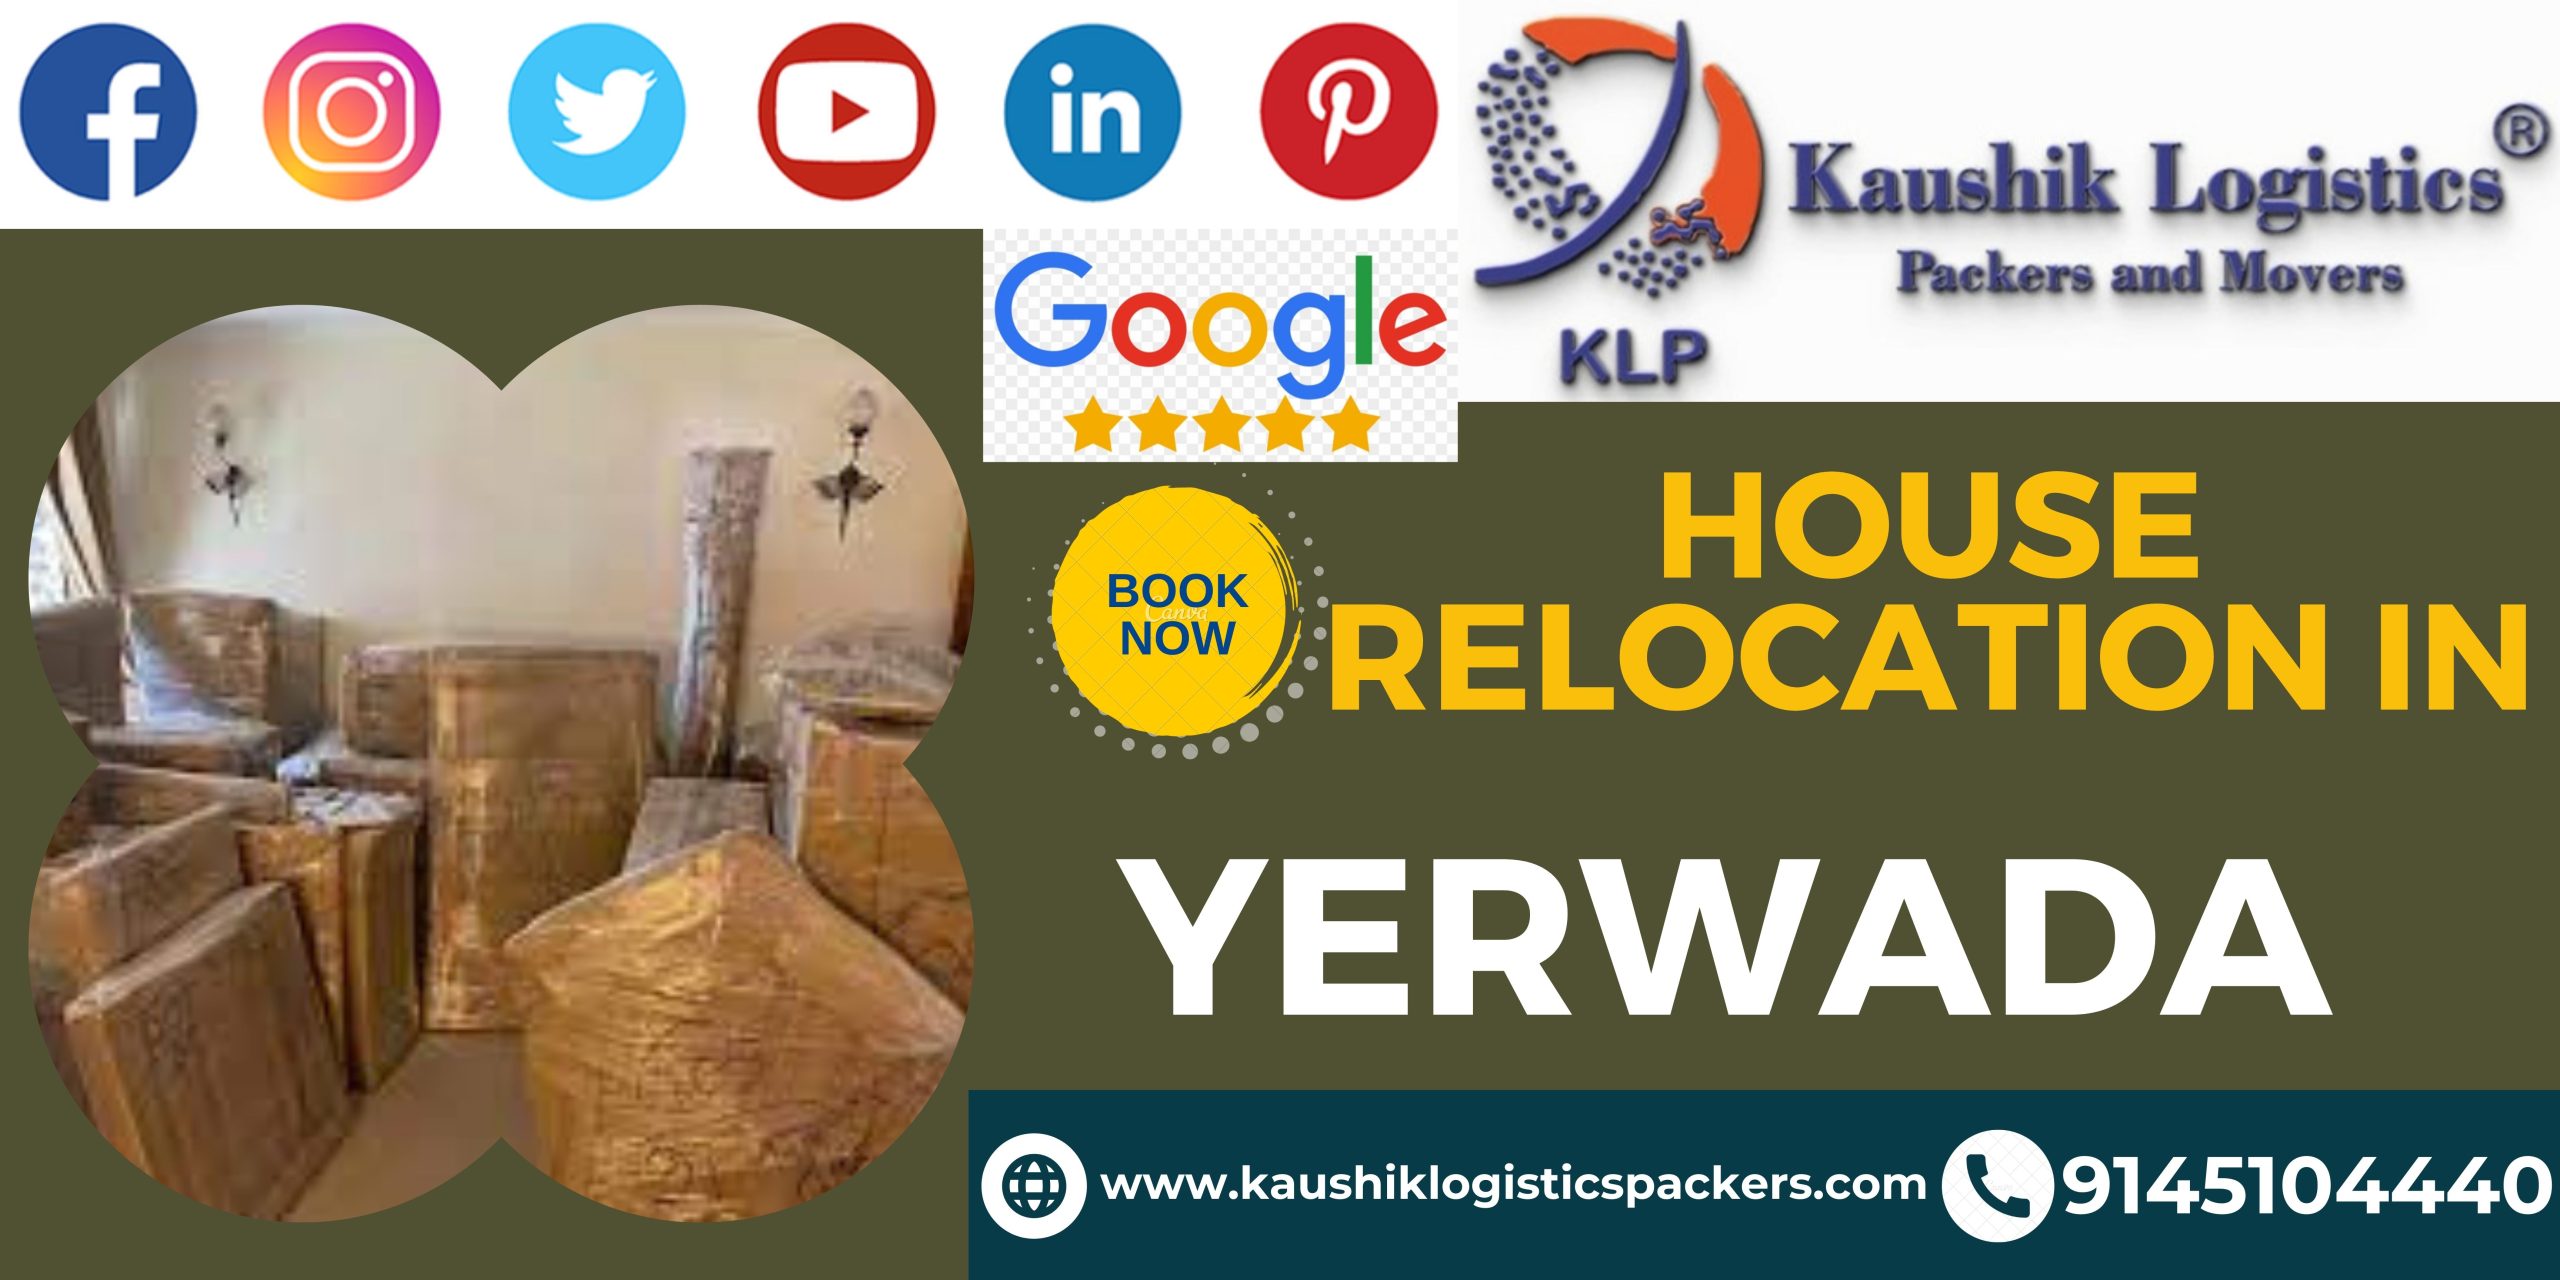 Packers and Movers In Yerwada